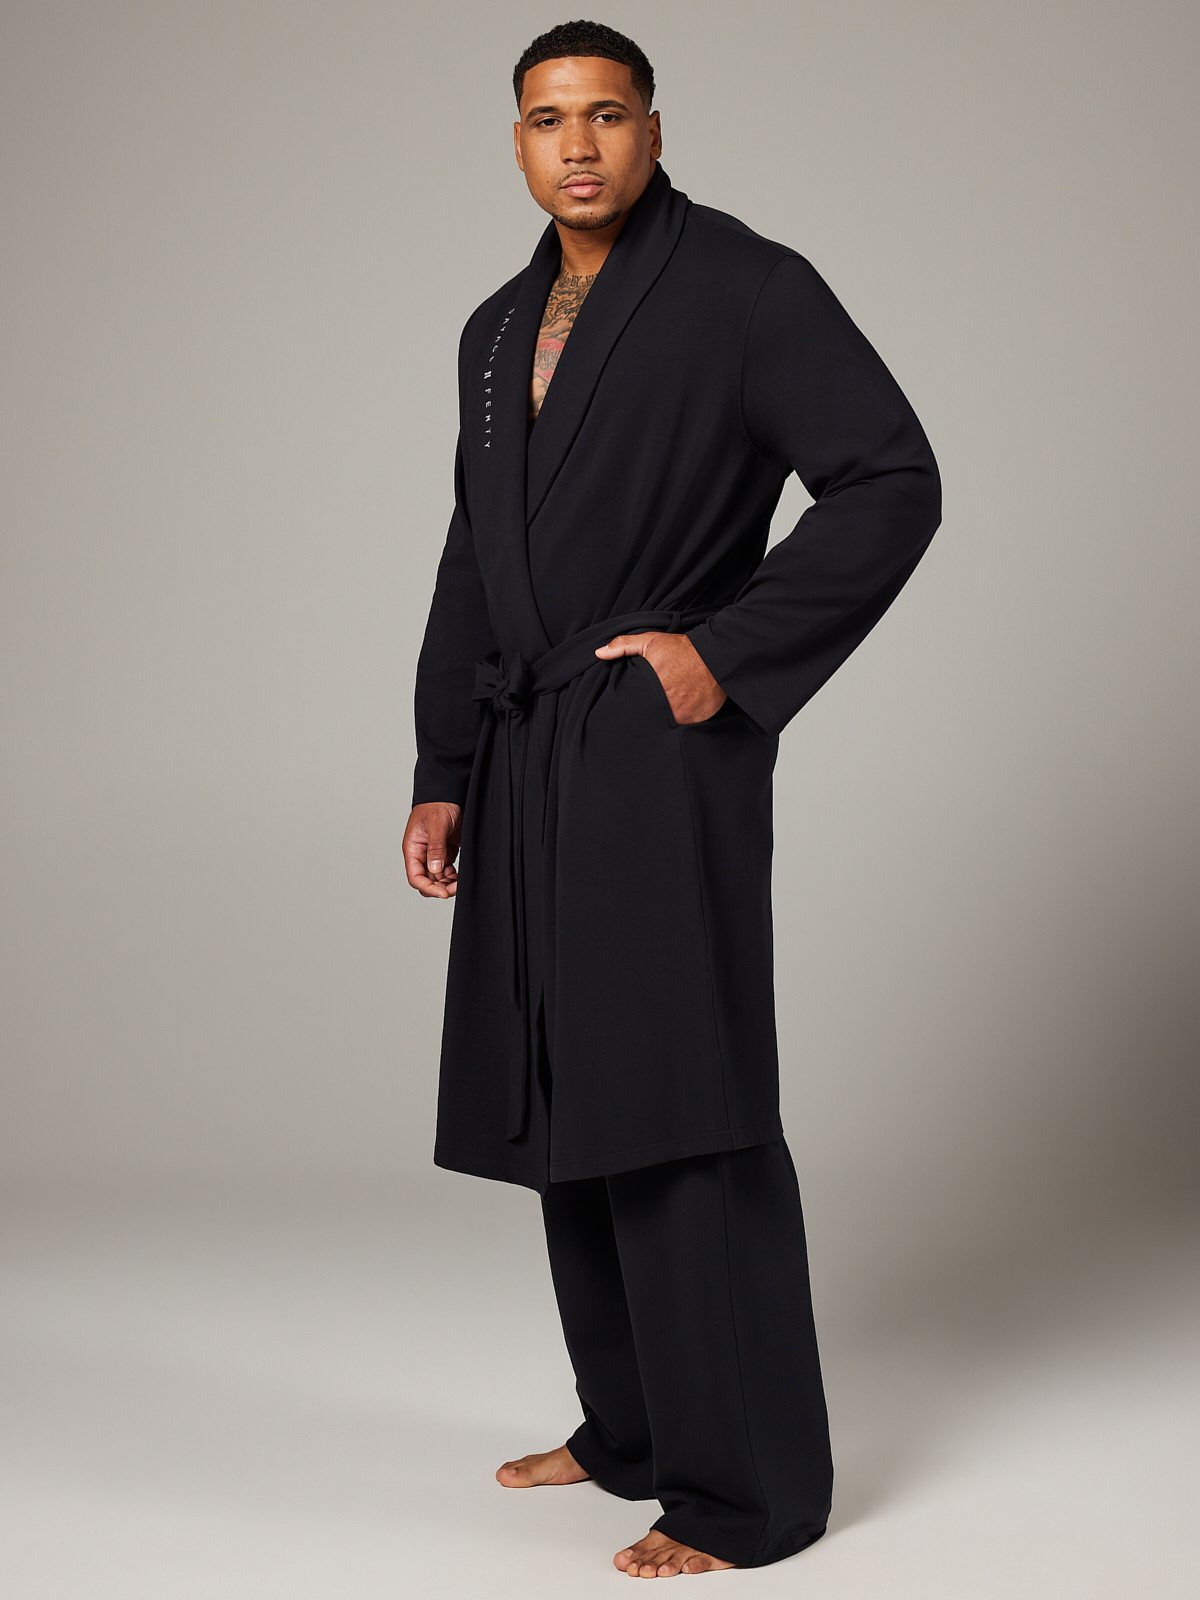 Savage X French Terry Robe in Black | SAVAGE X FENTY